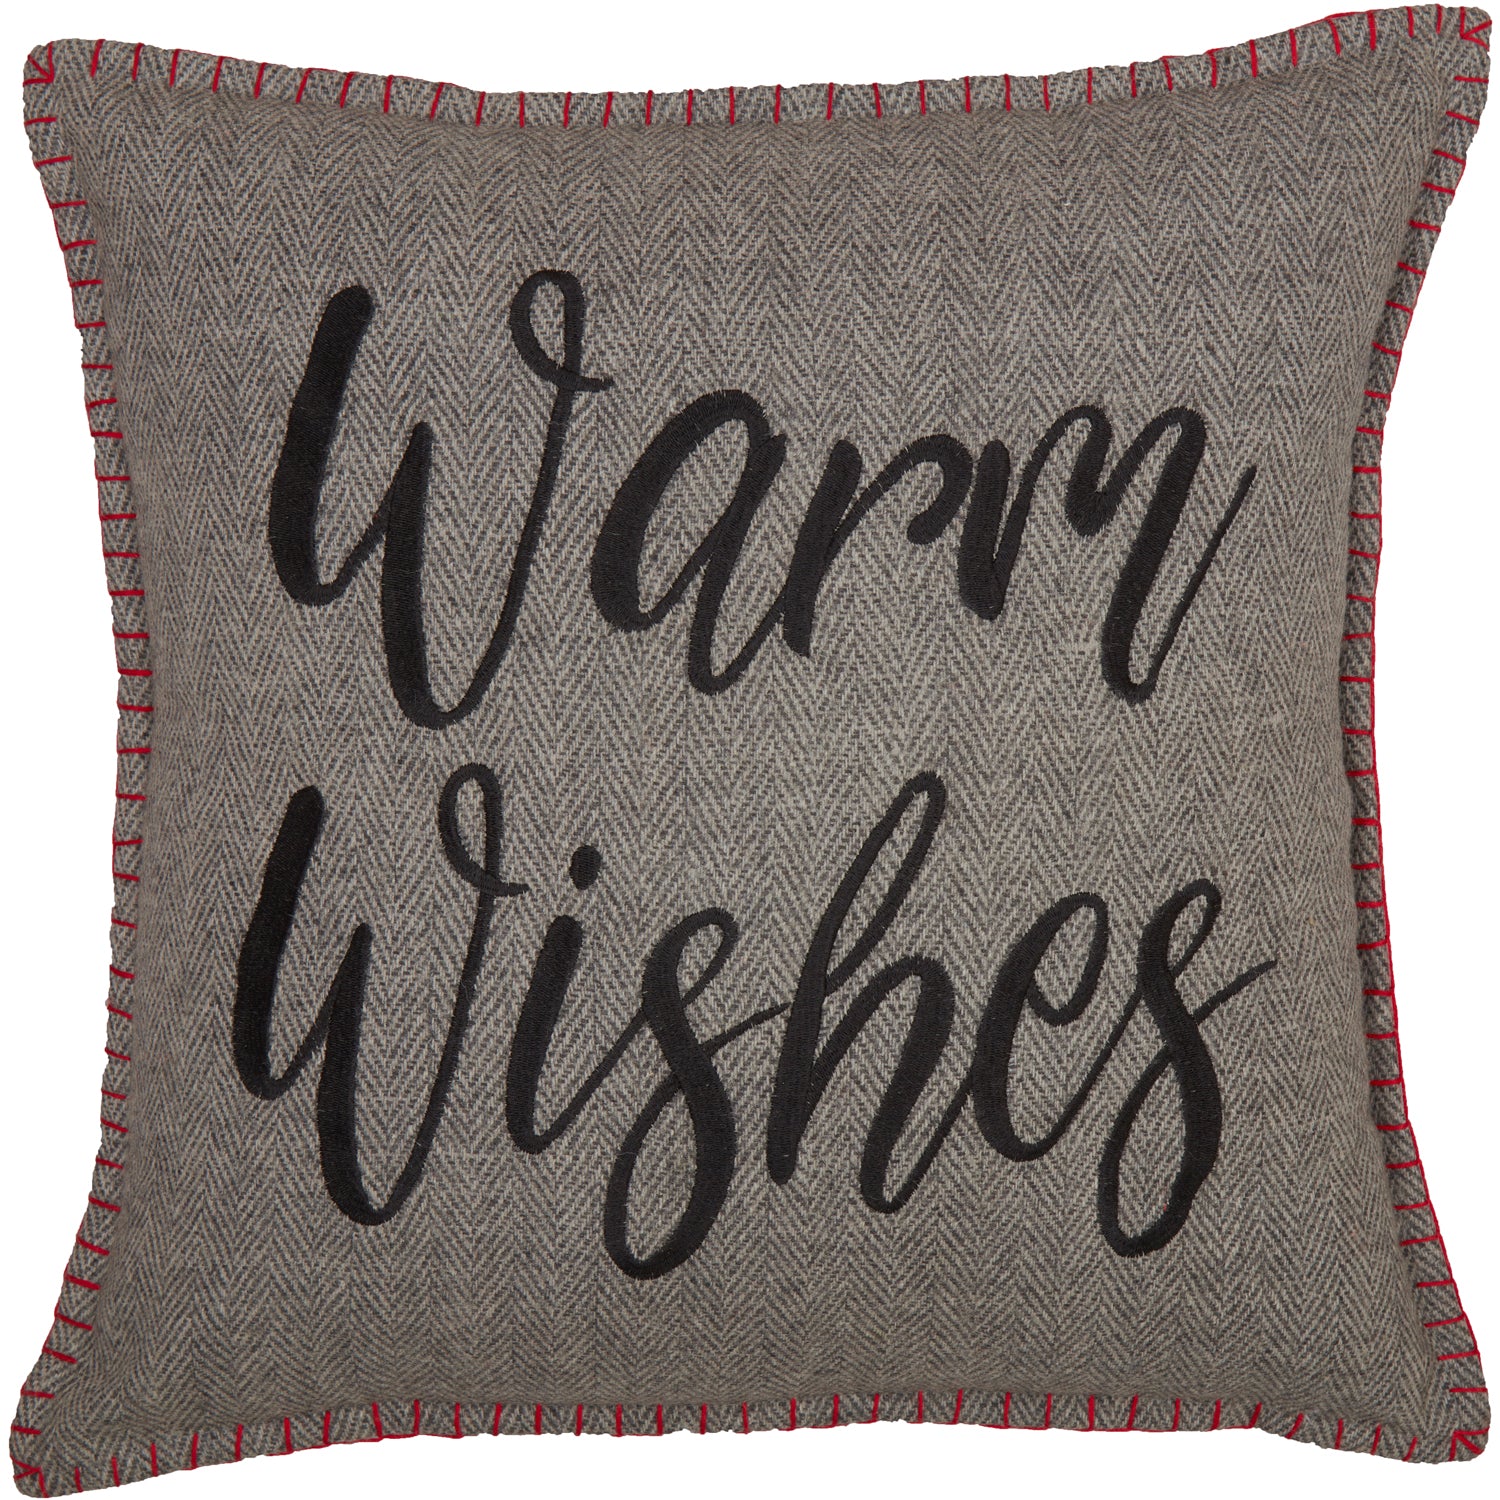 57339-Anderson-Warm-Wishes-Pillow-18x18-image-2